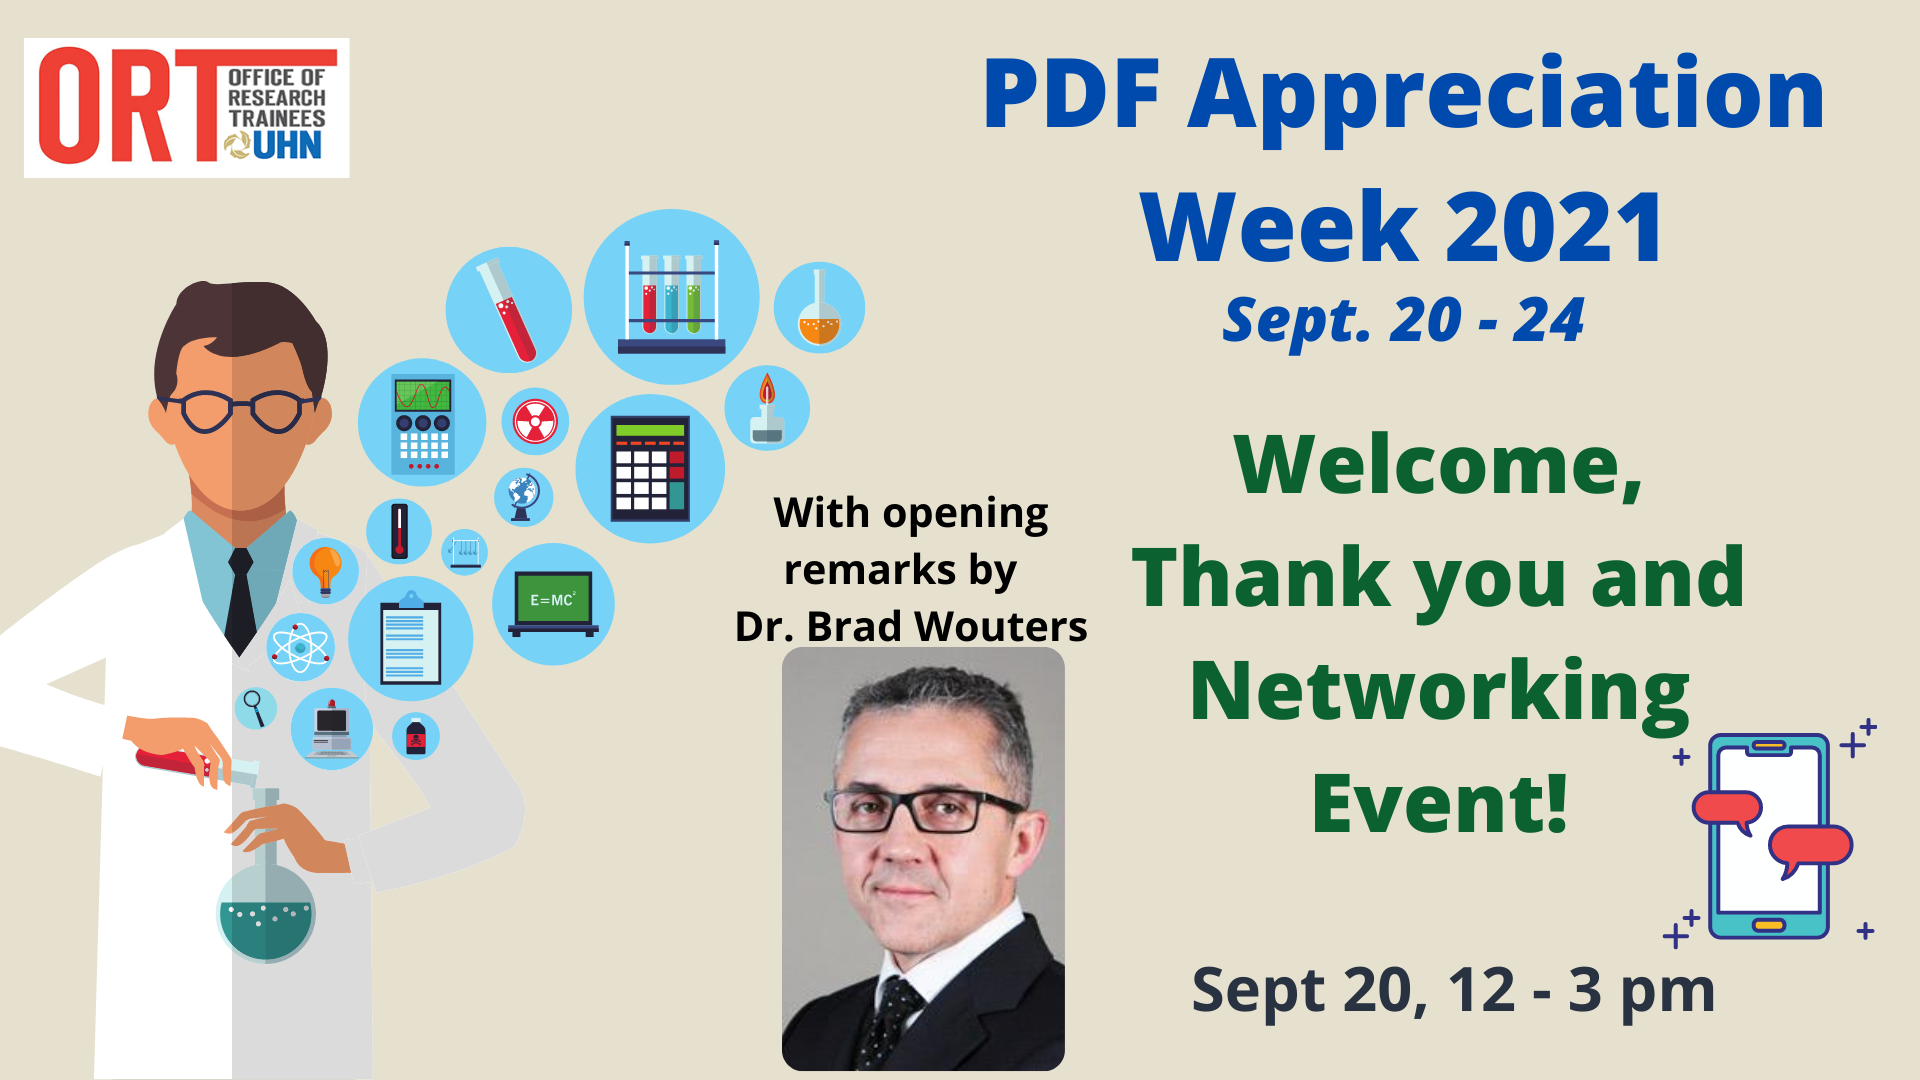 Poster for a PDF Appreciation Week 2021 Event. Welcome, Thank you, and Networking Event. Sept 23, 12- 3 pm. With opening remarks by Dr. Brad Wouters.